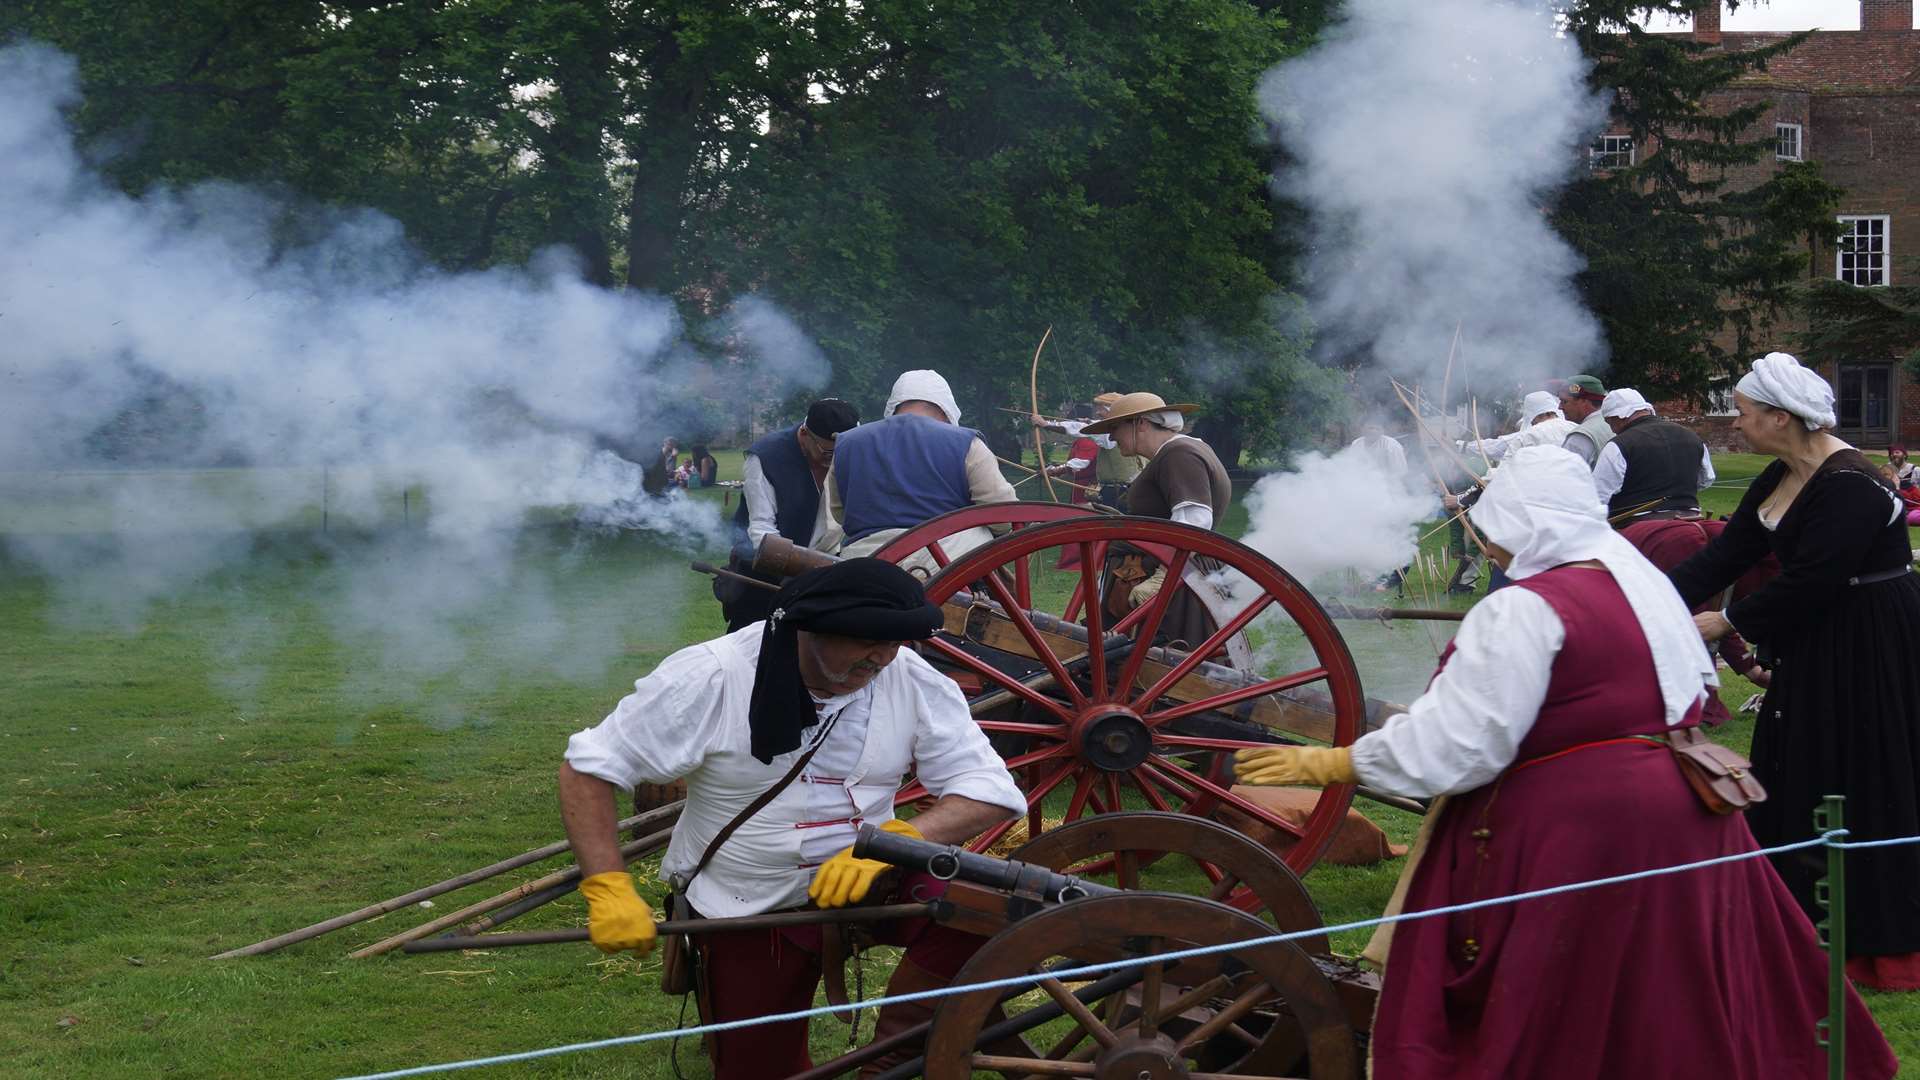 There will be a medieval weekend at Lullingstone Castle over the late May bank holiday weekend